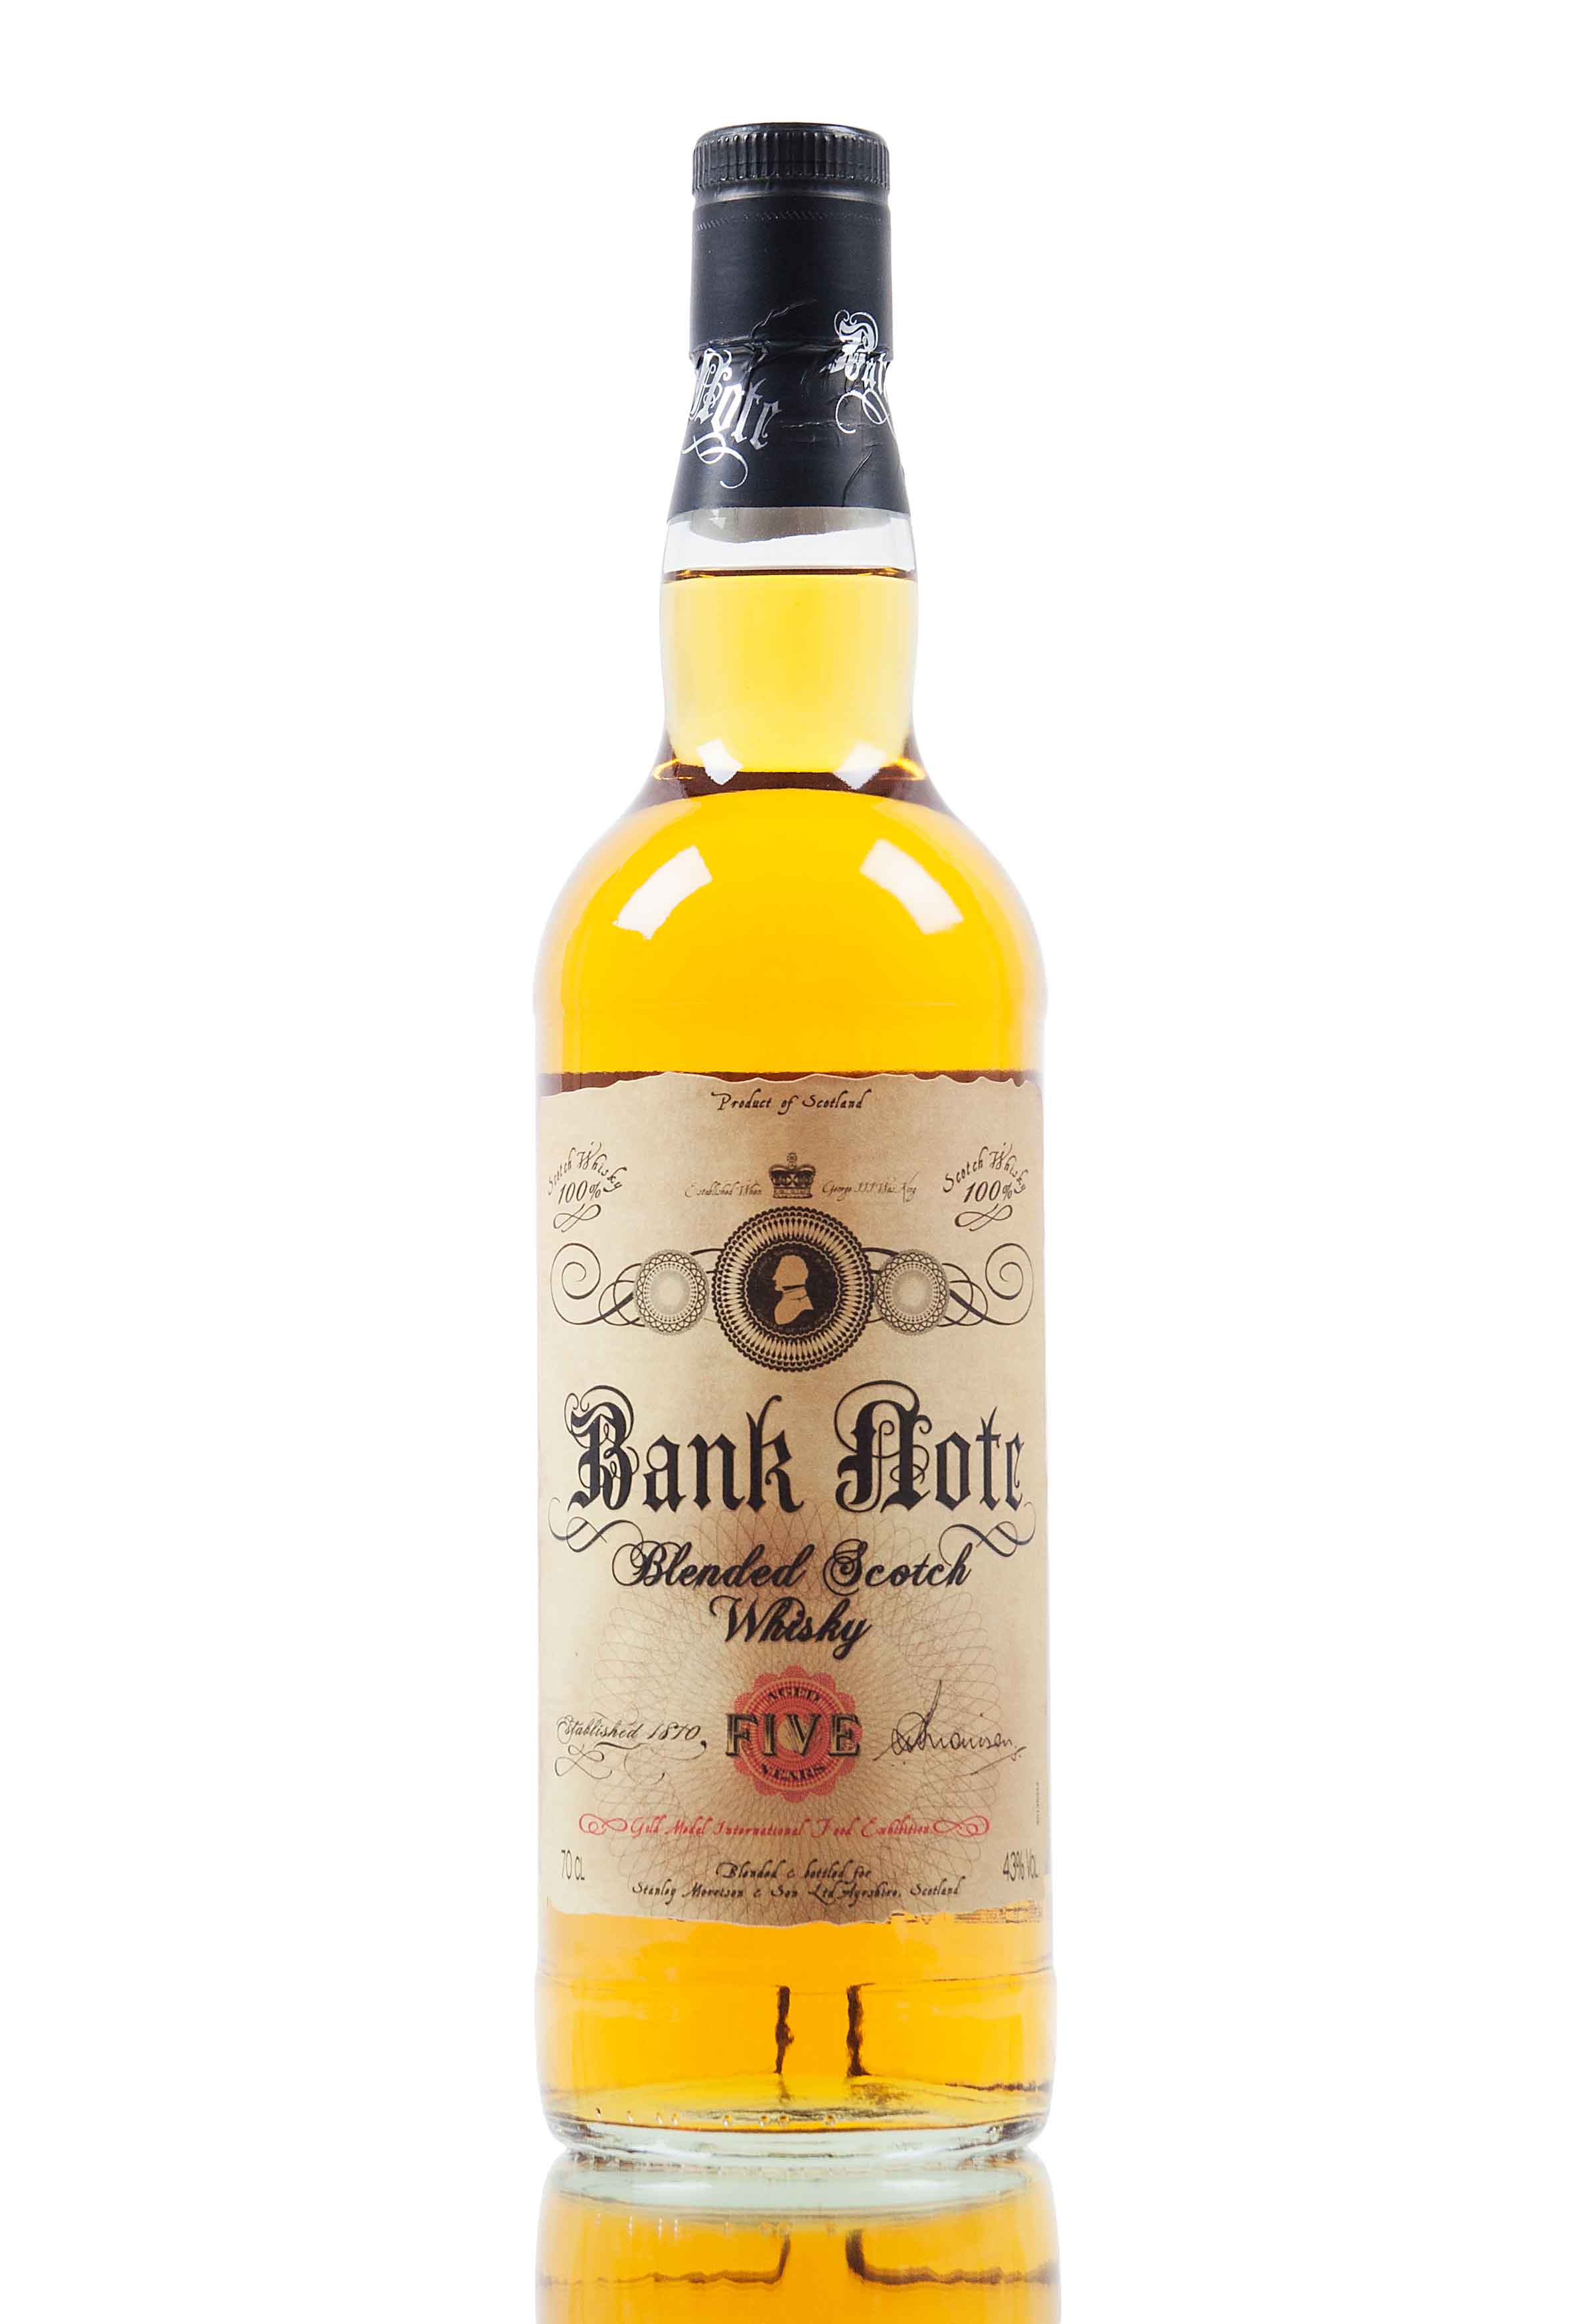 Bank Note Blended Scotch Whisky / 5 Year Old